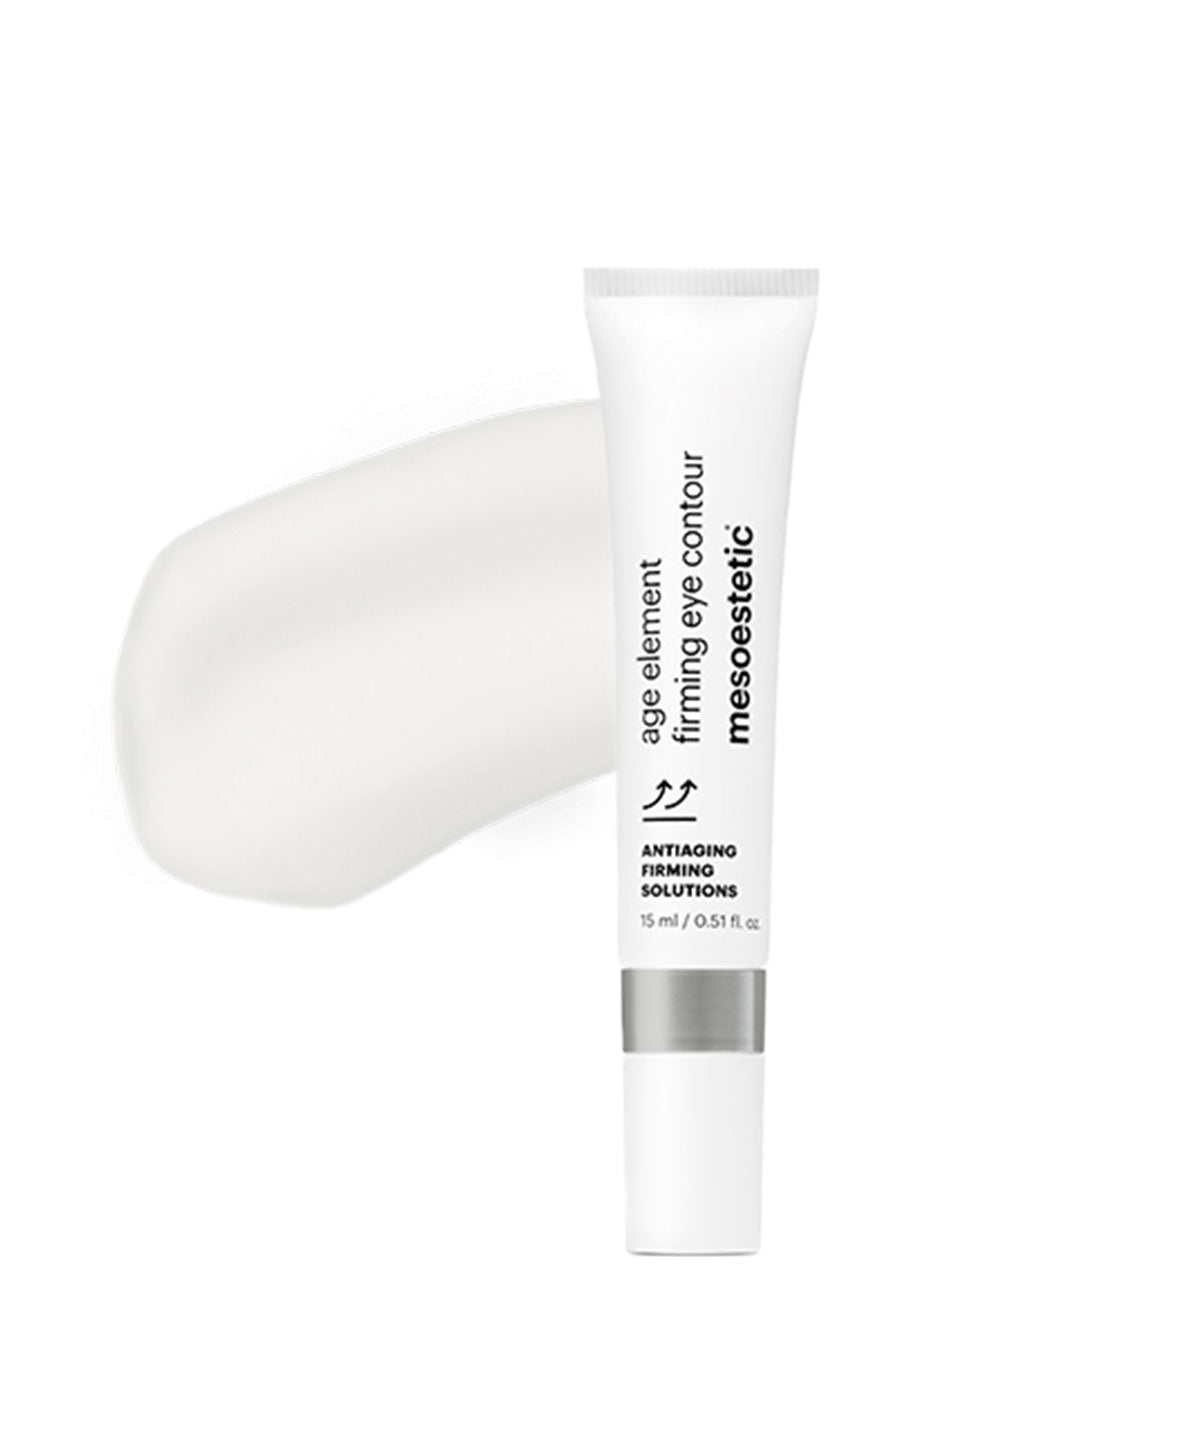 Mesoestetic Age Element Firming Eye Contour